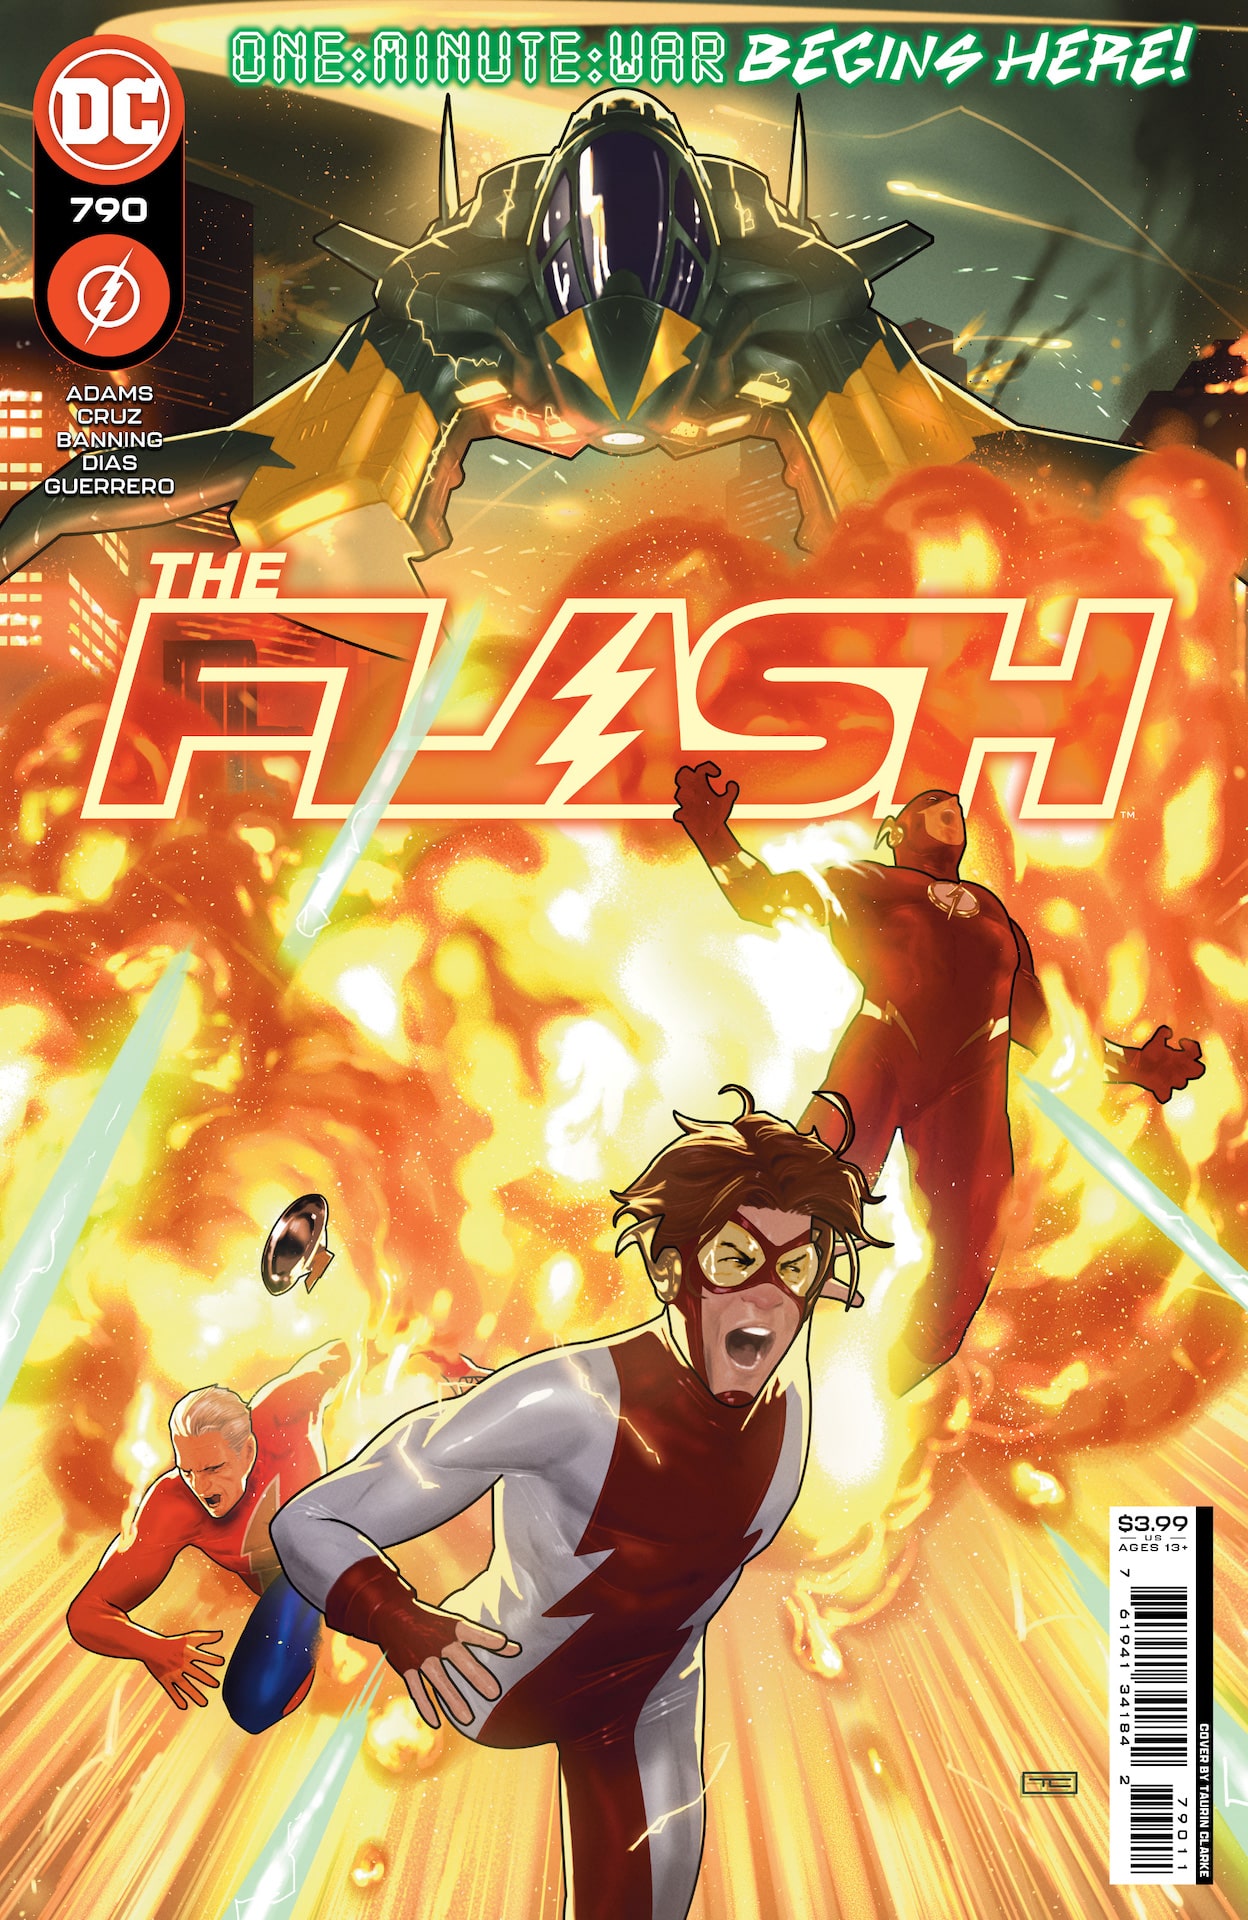 DC Preview: The Flash #790